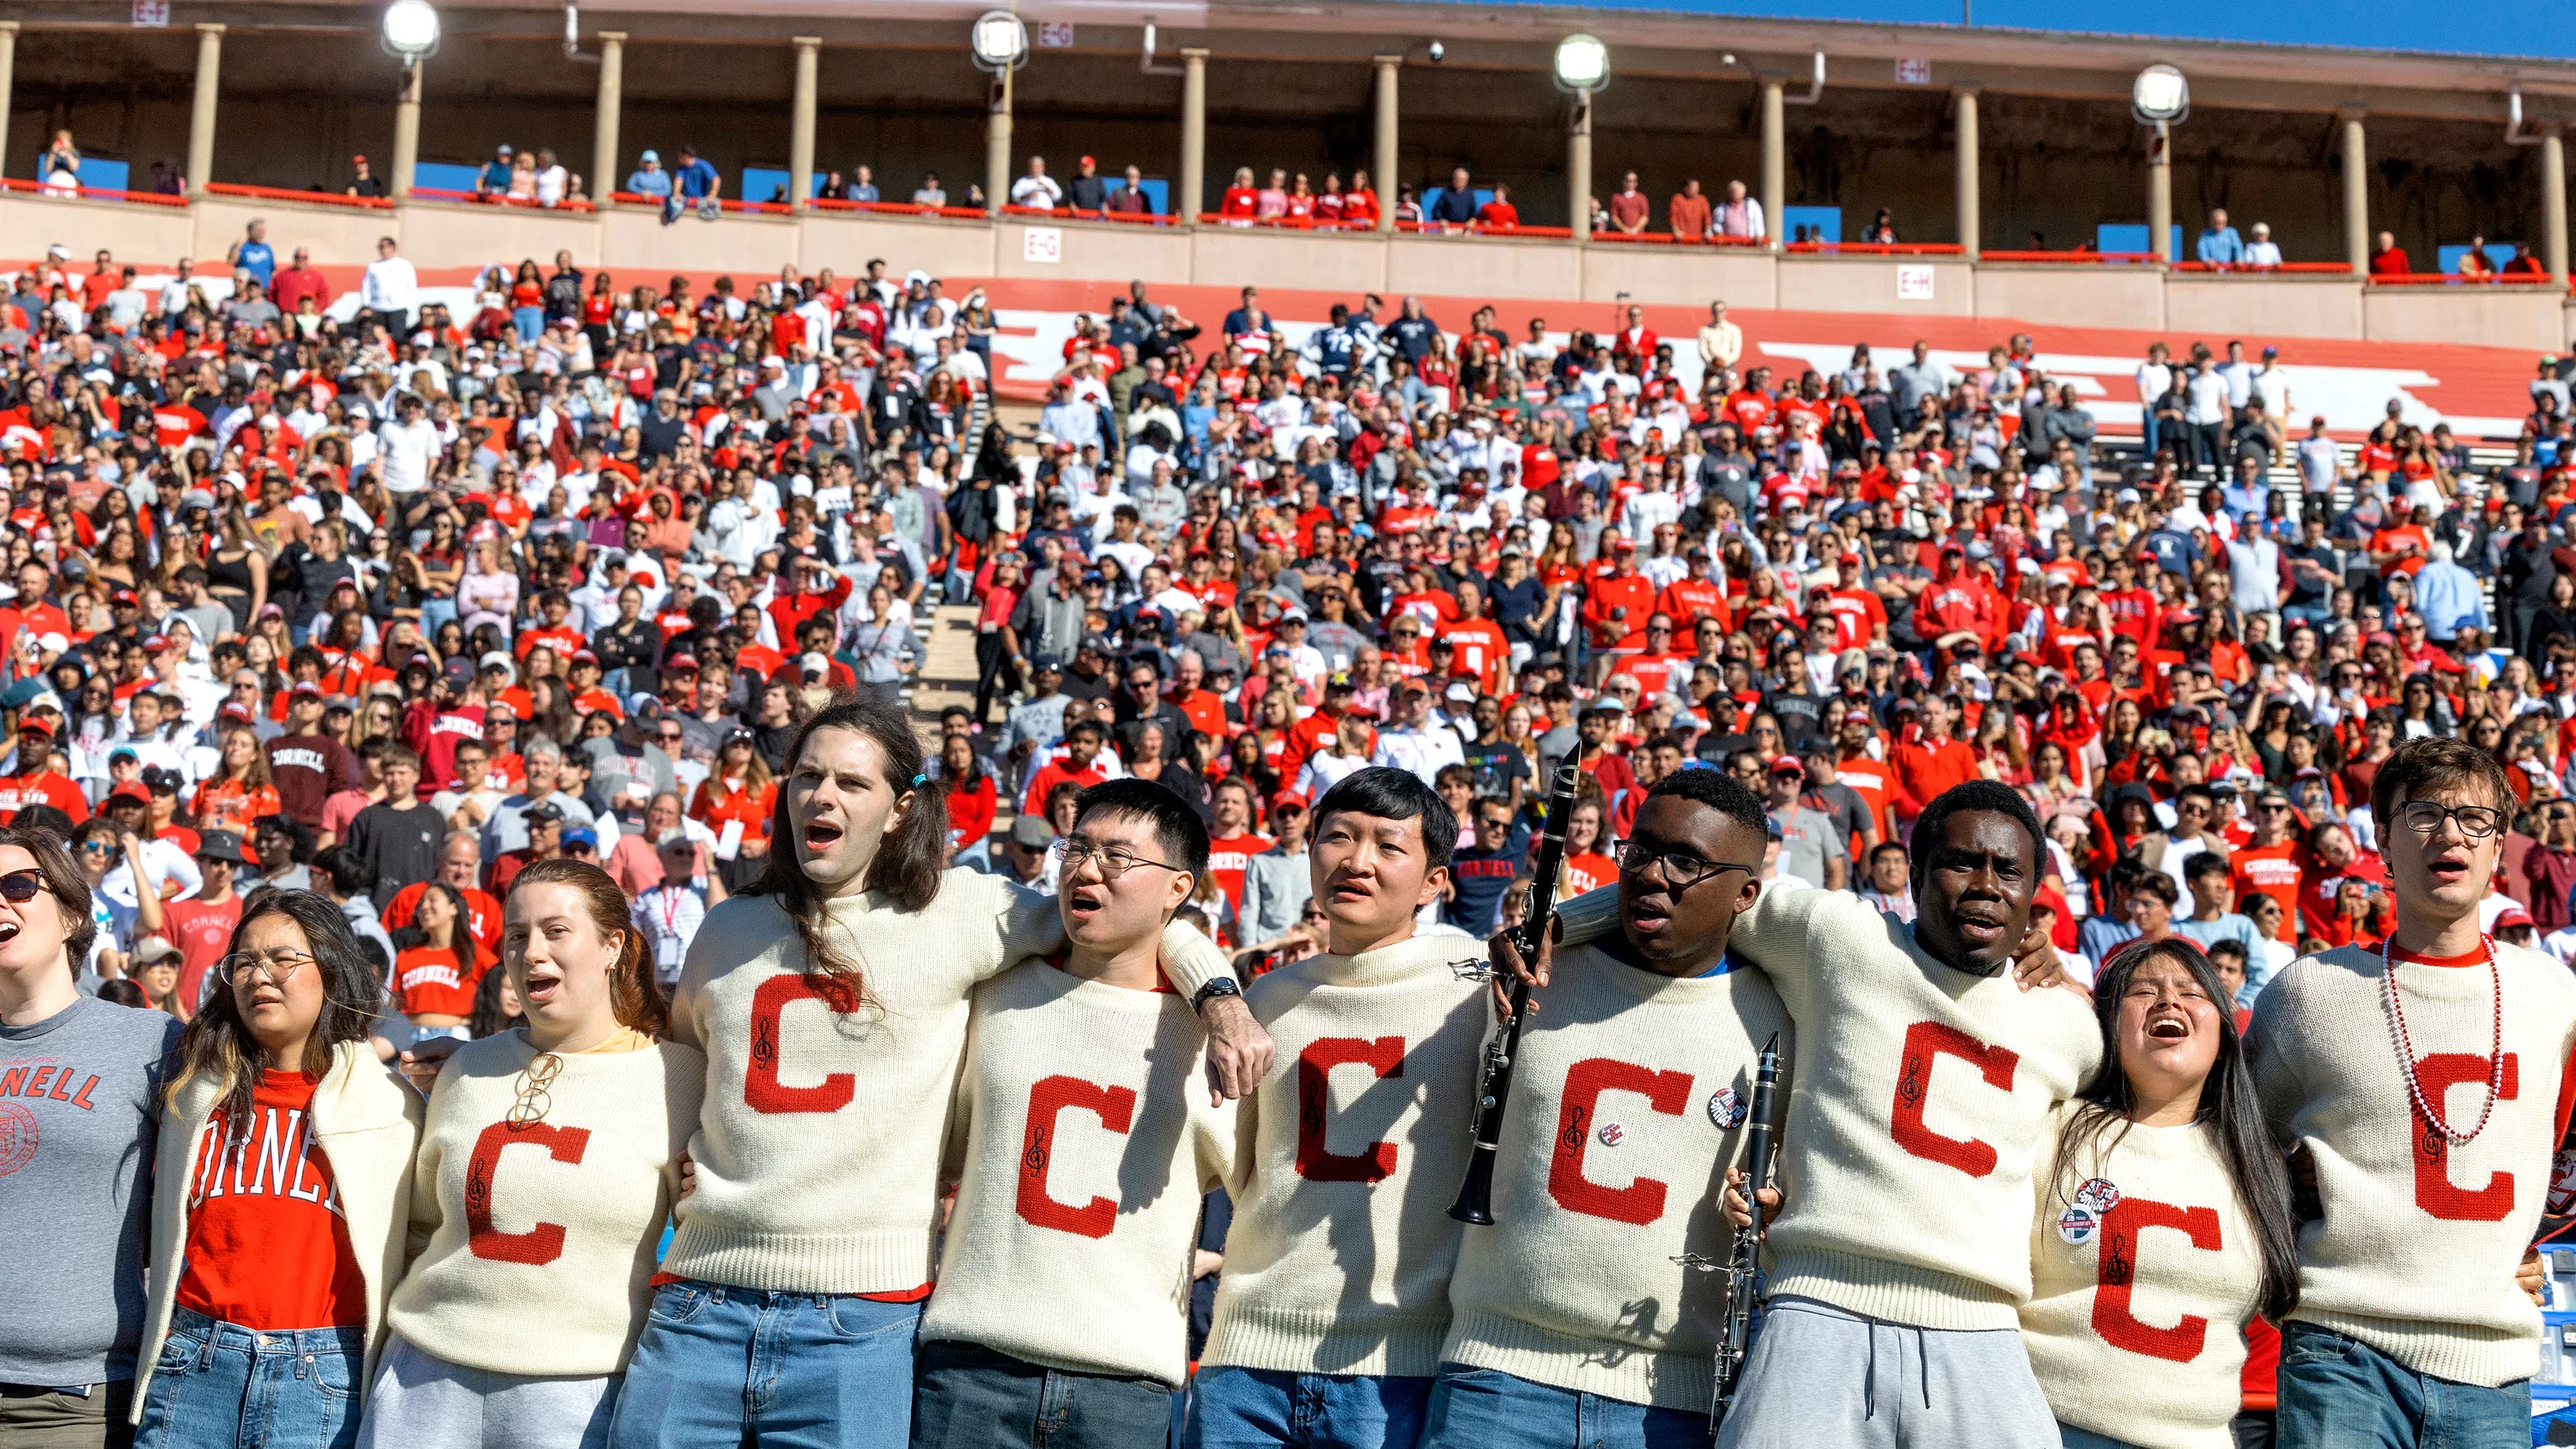 Eight Cornell students are locked arm in arm. Each is wearing a white sweater with a red letter C on the front. Behind them are stadium stands filled with people. 